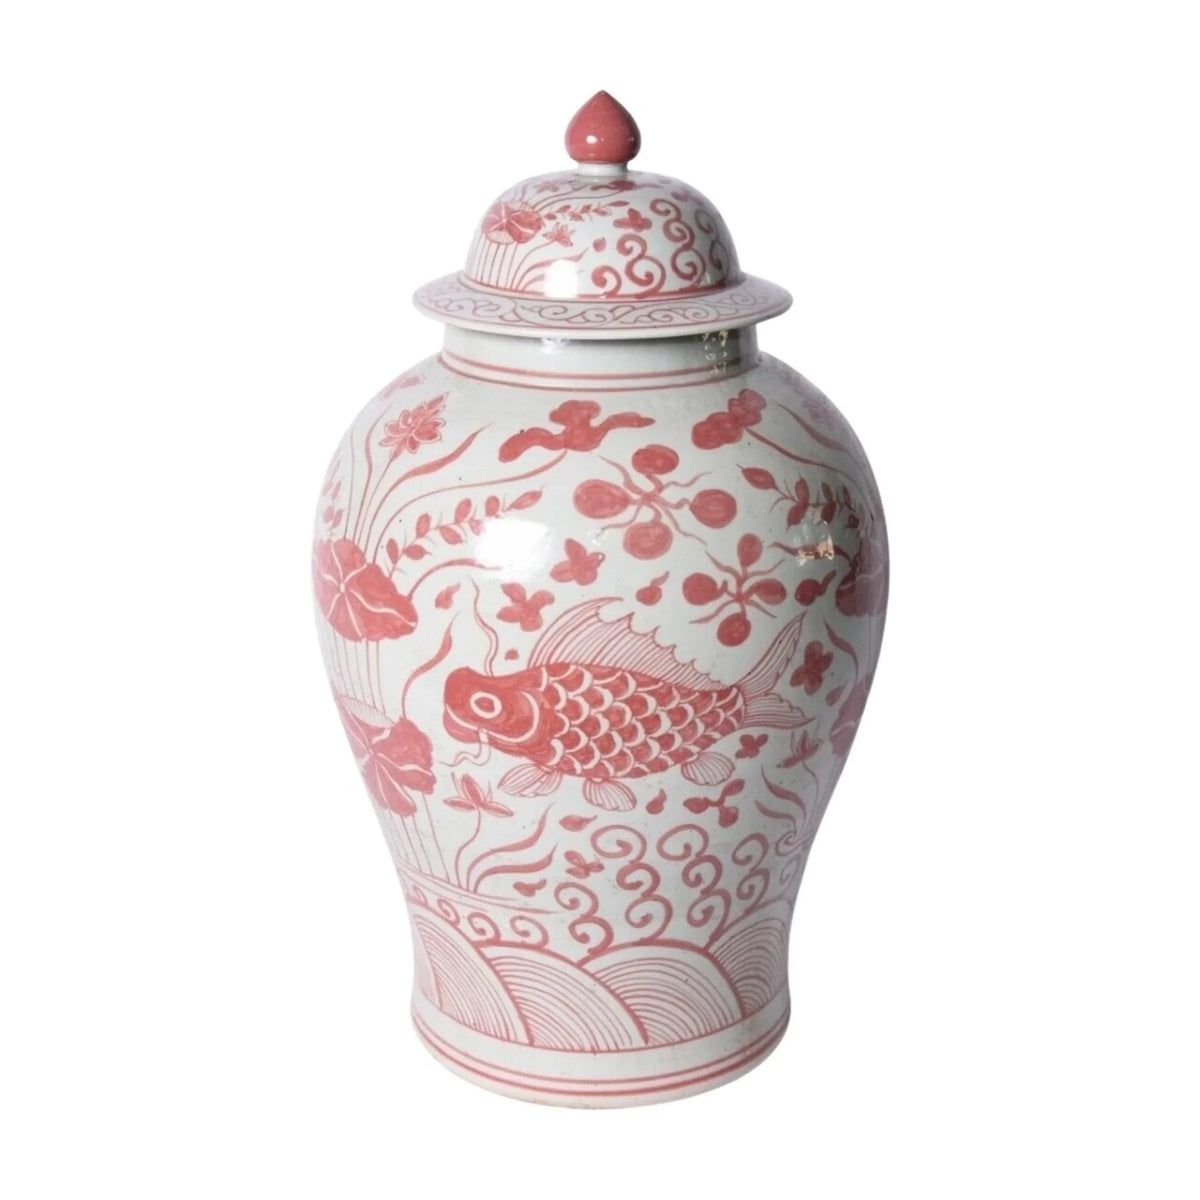 Coral Red Fish Porcelain Temple Jar | The Well Appointed House, LLC